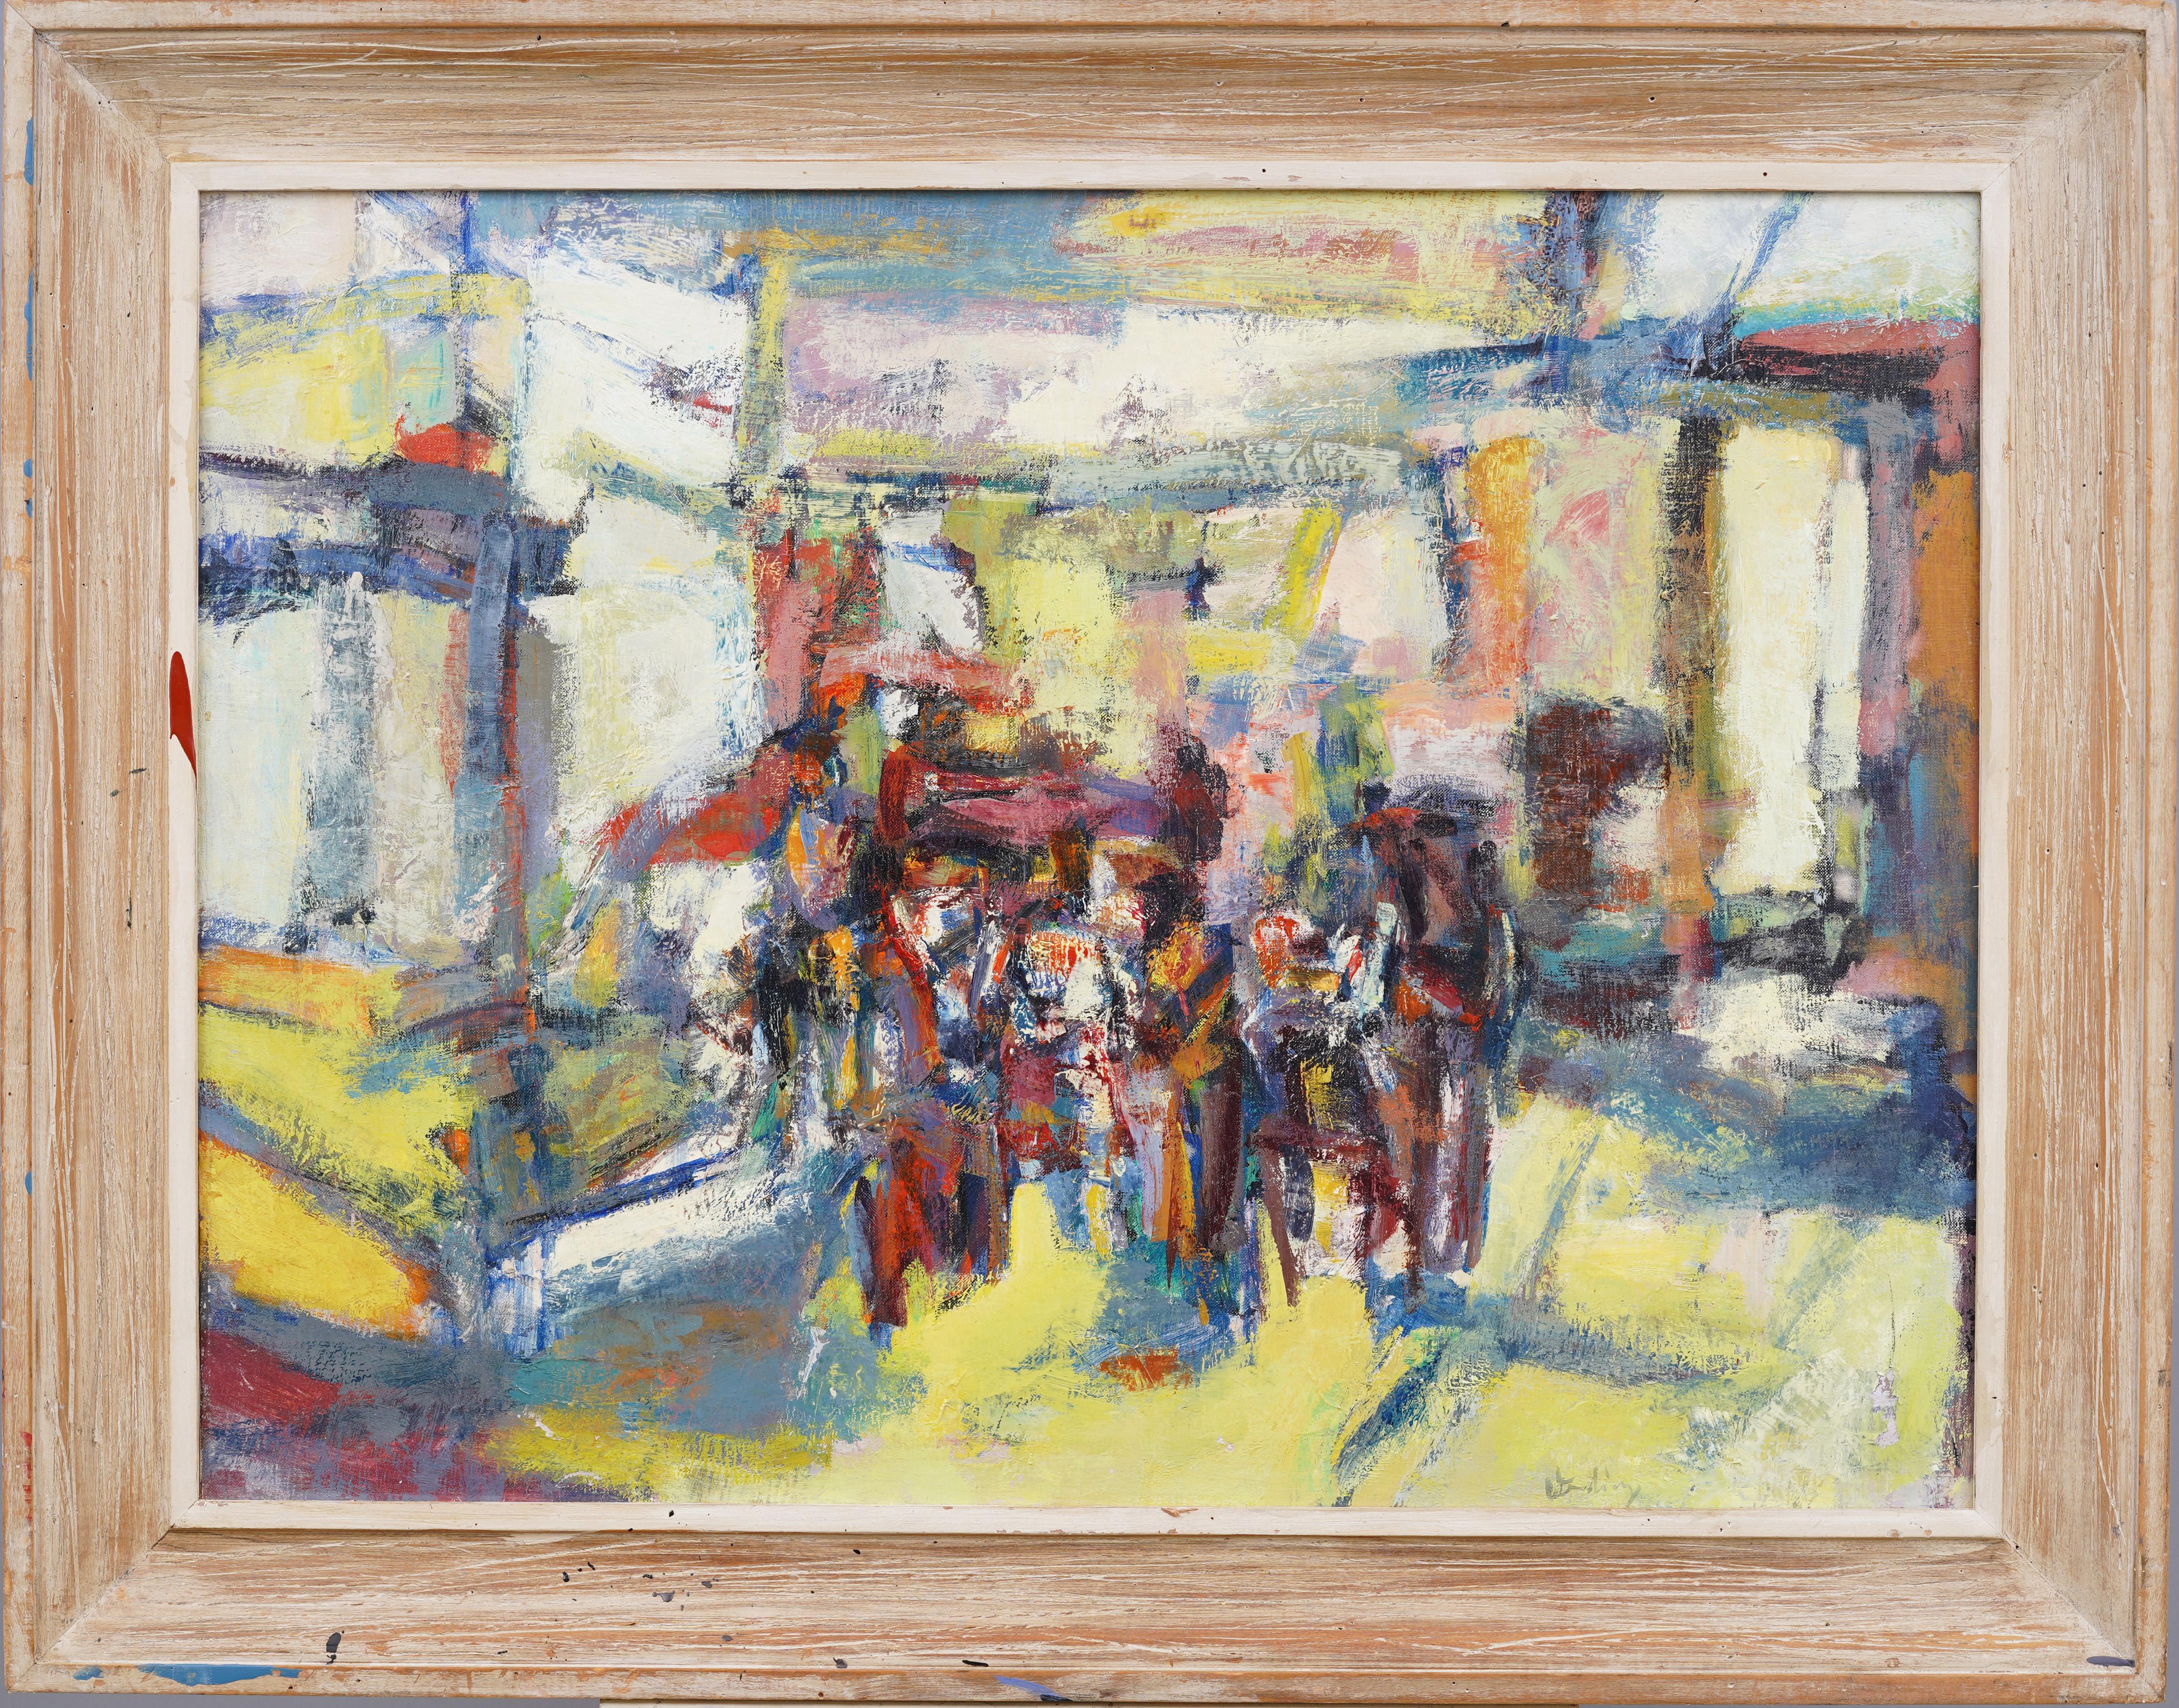 Nicely painted mid century abstract expressionist  oil painting by Erwin Wending (1914 - 1993).  Great color and composition.  Framed.  Signed.  Exhibition and museum labels verso.  